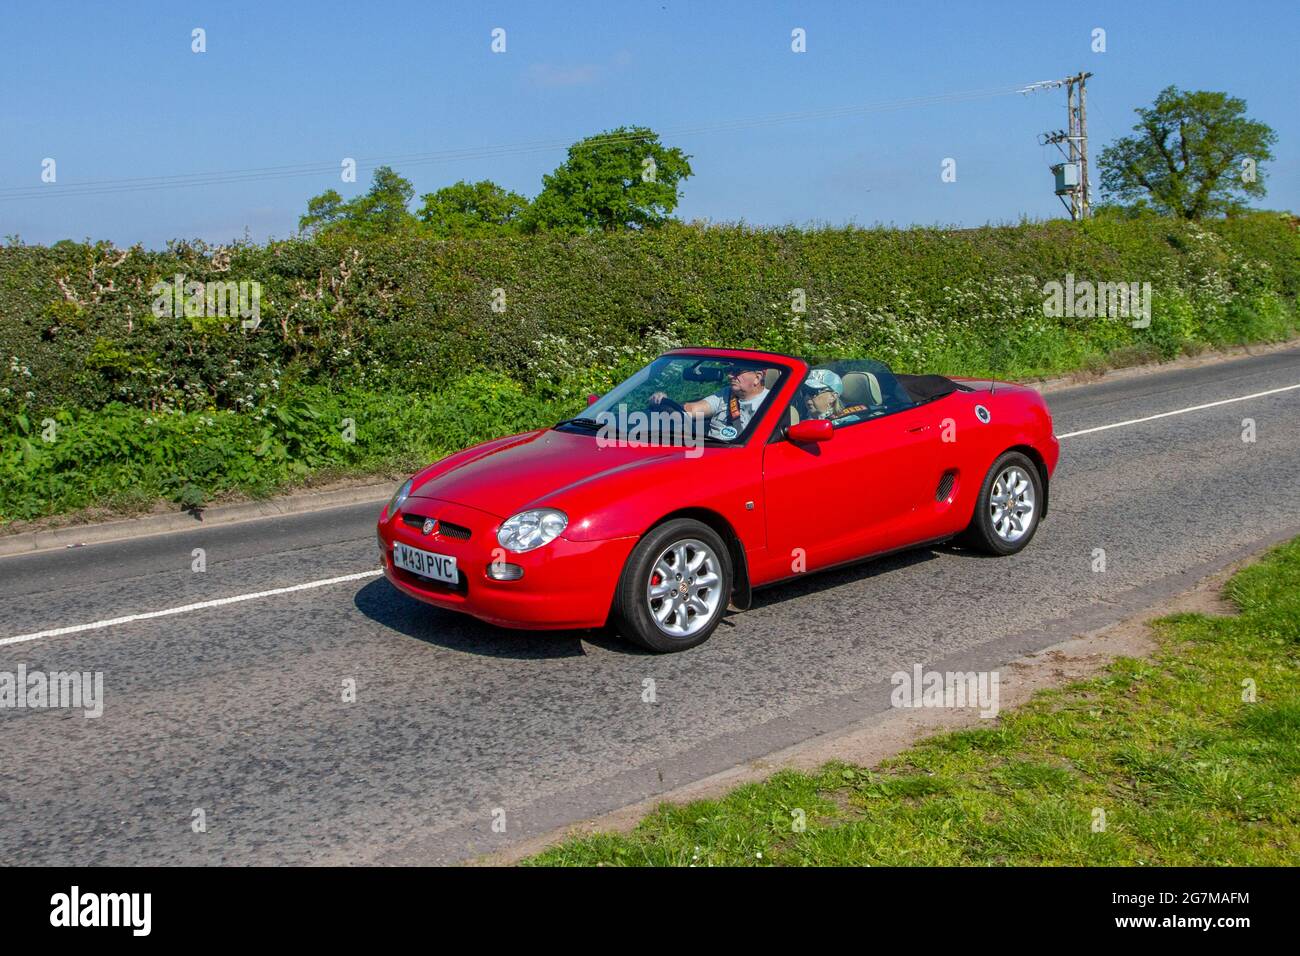 2000 MG Mgf red roadster 1796cc petrol cabriolet en-route to Capesthorne Hall classic May car show, Cheshire, UK Stock Photo